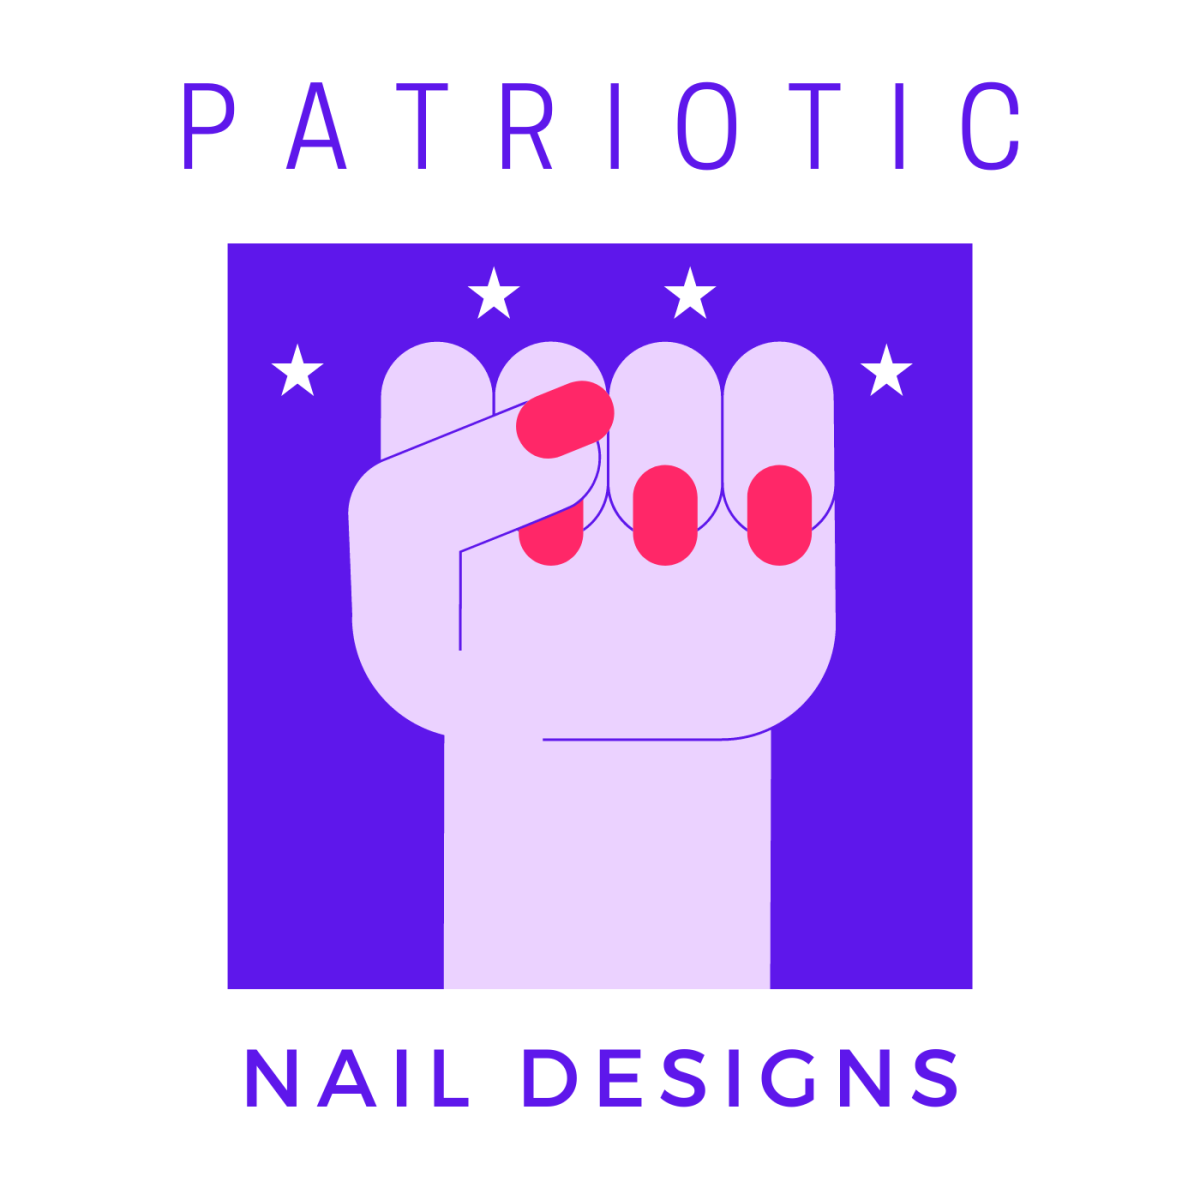 35+ Patriotic Nail Designs to Show off Your Red, White, and Blue